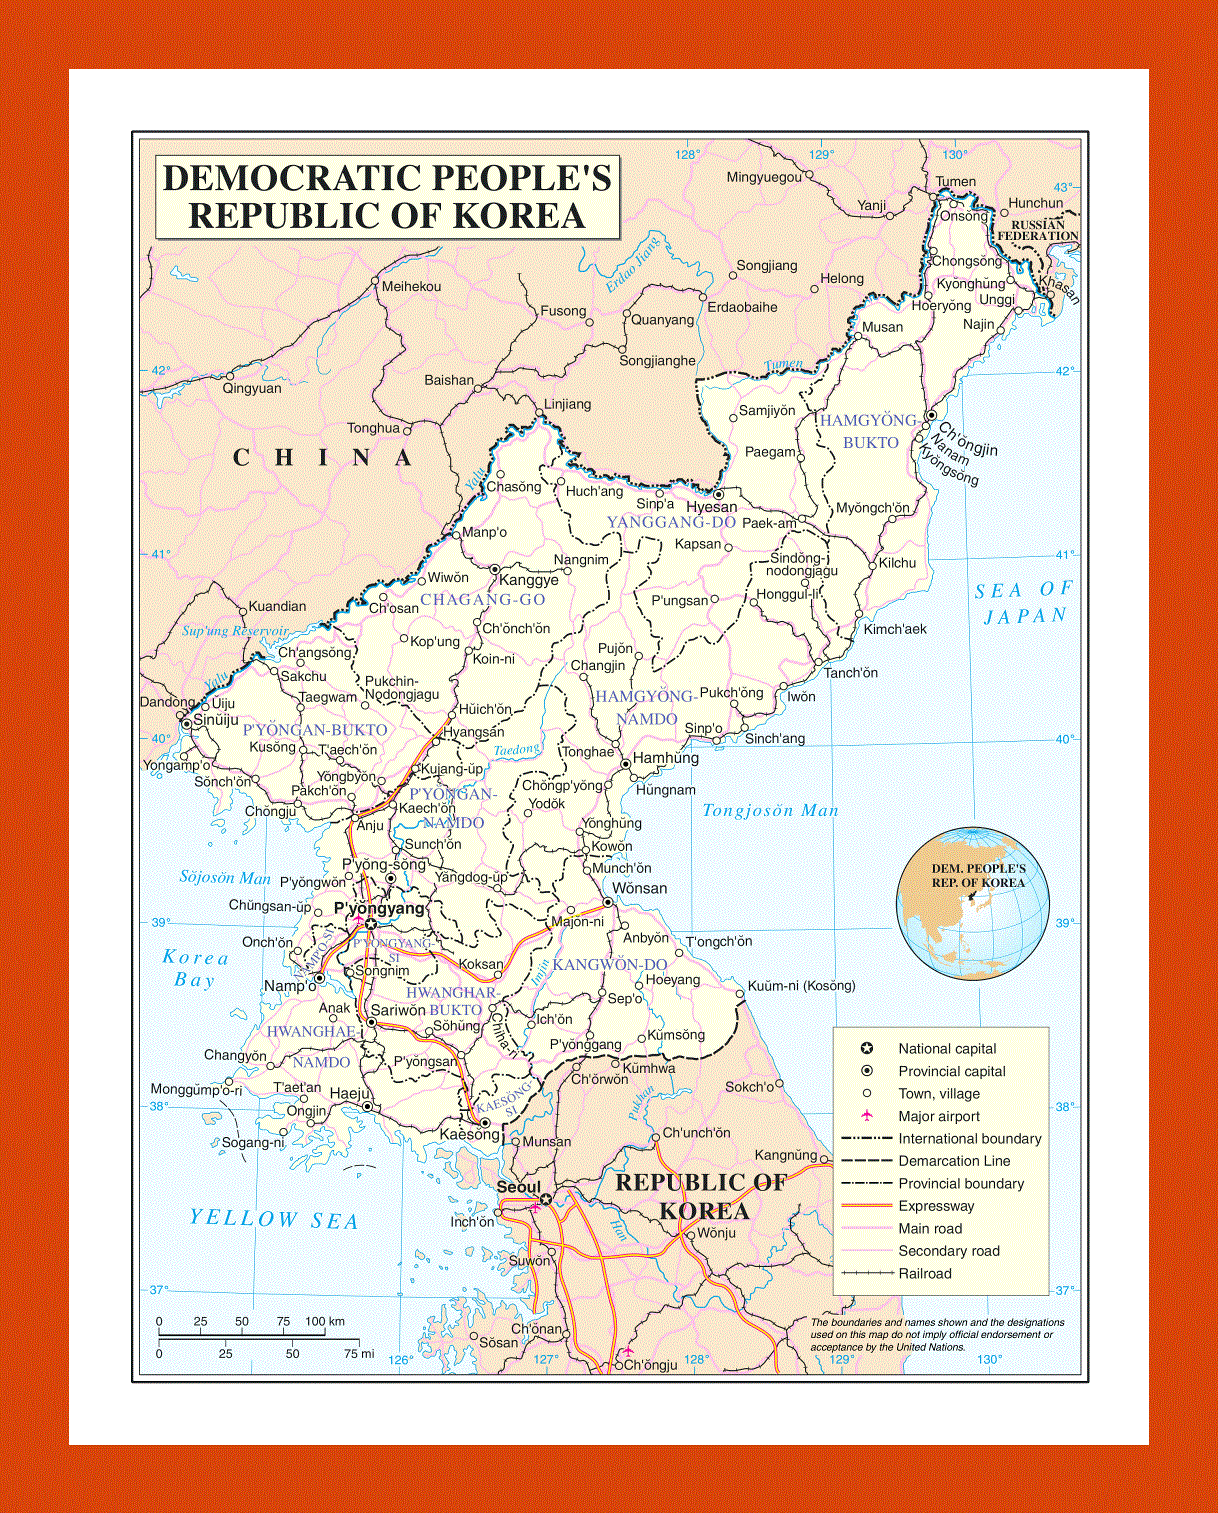 Political and administrative map of North Korea